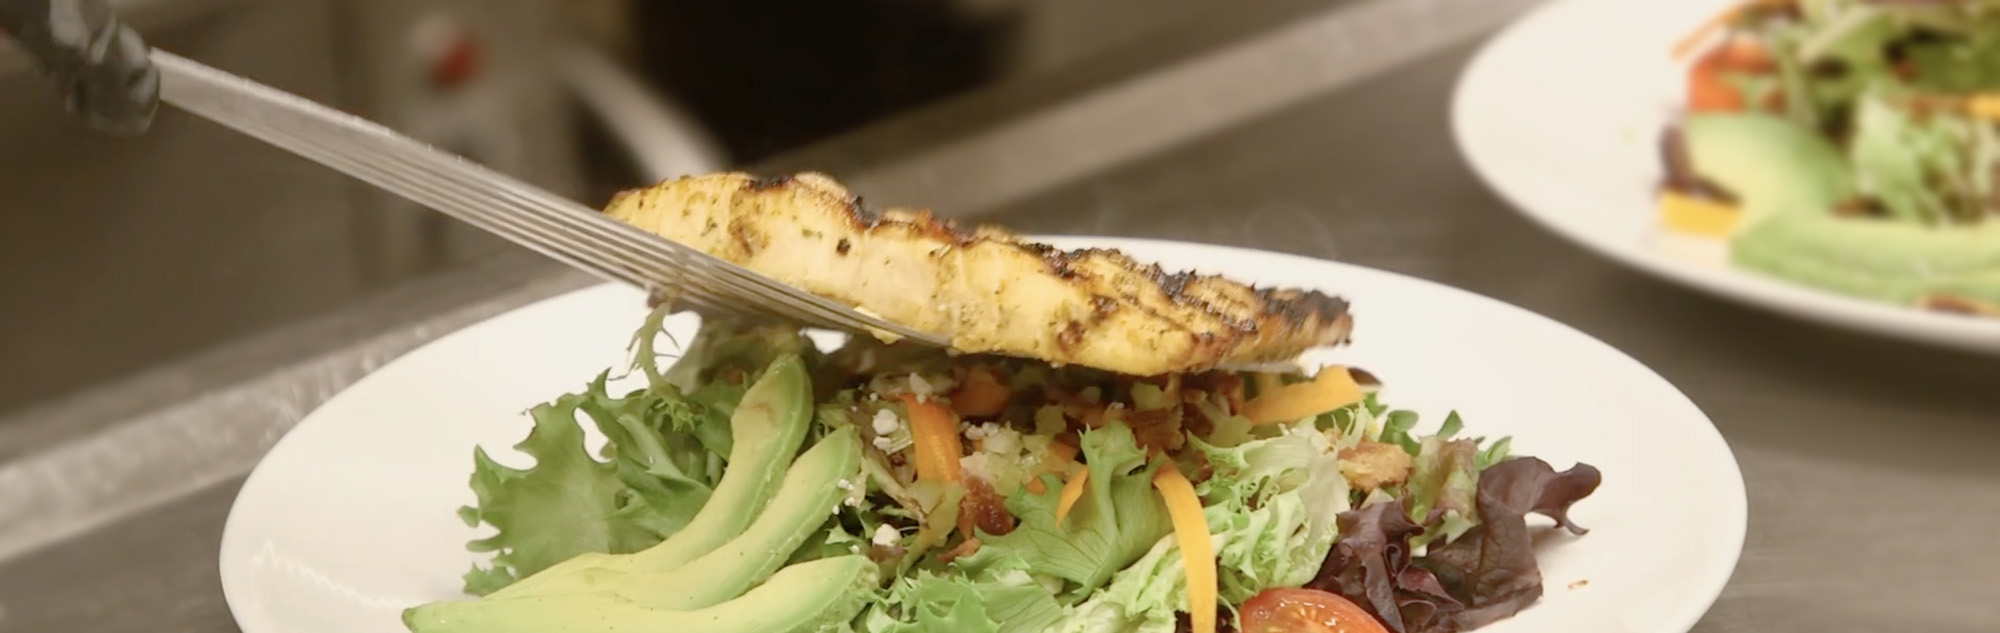 Grilled chicken is placed on green salad.